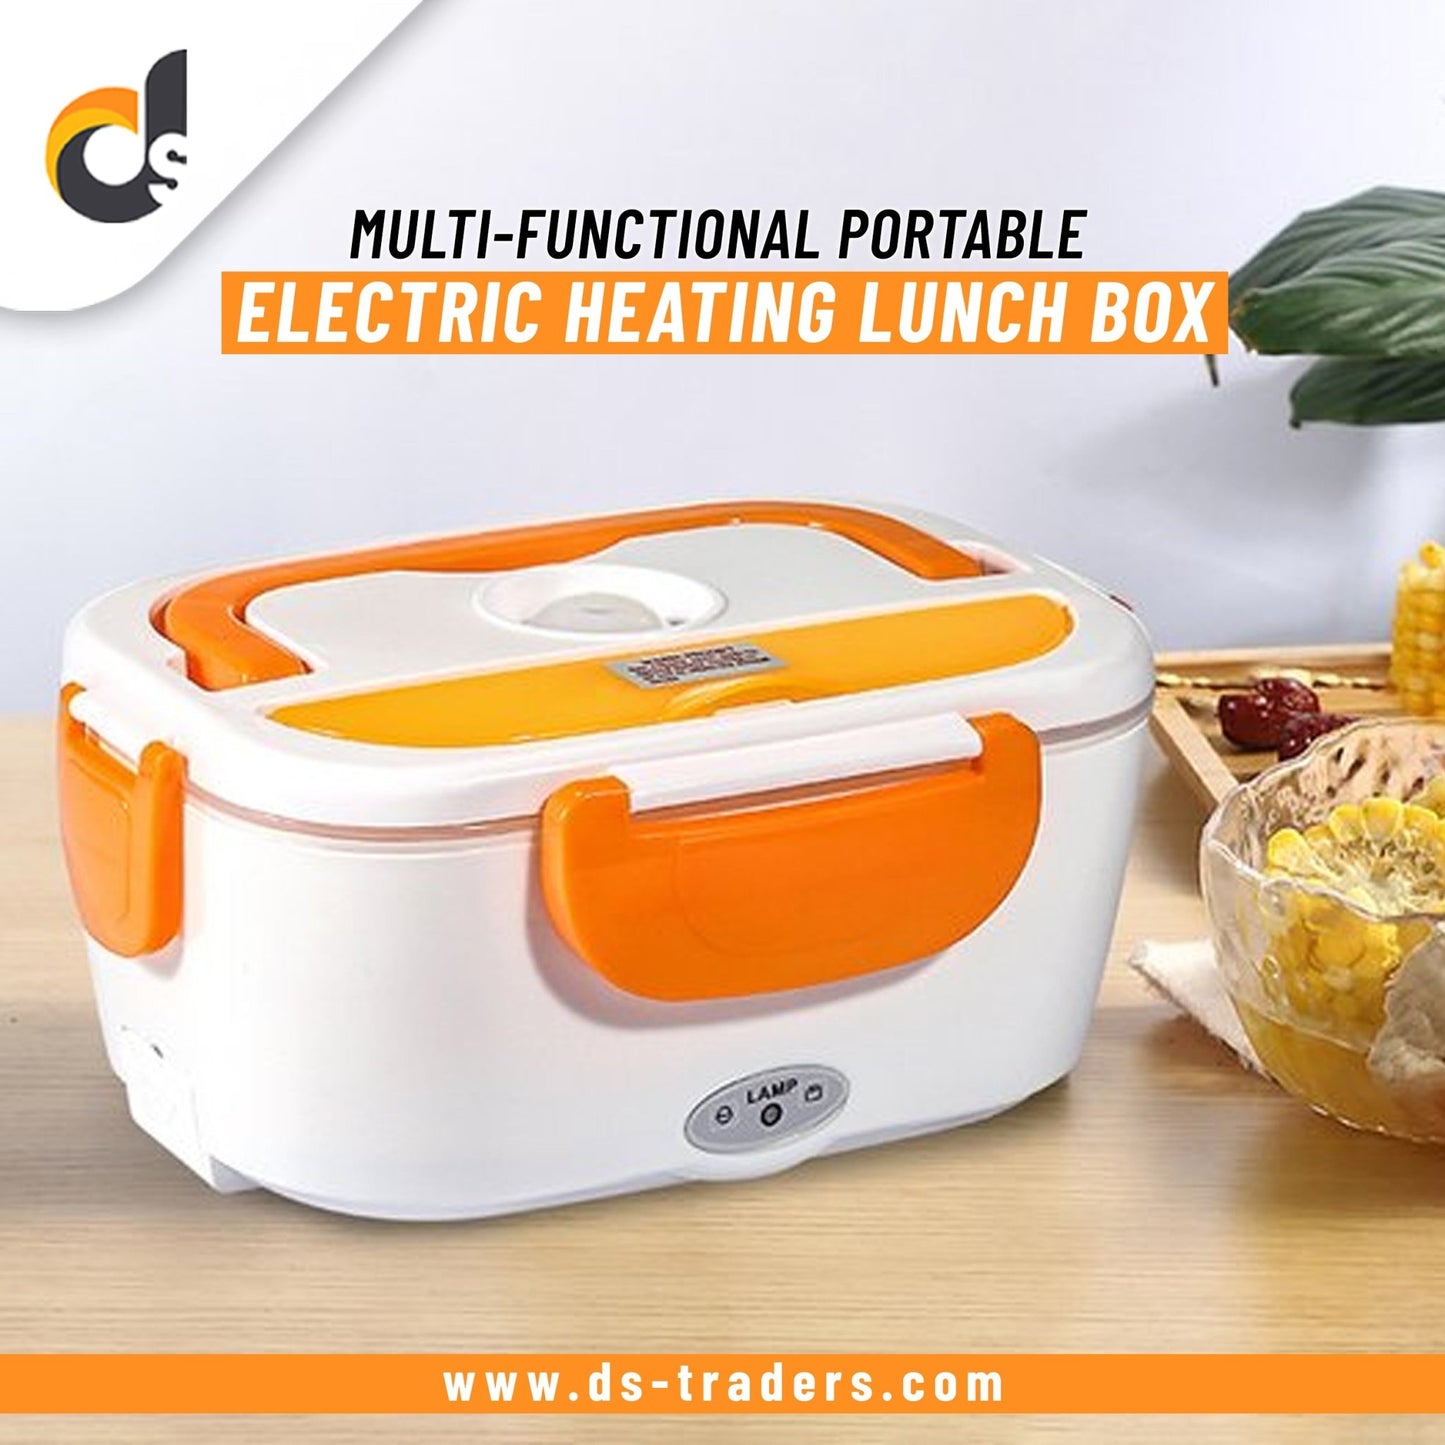 Multi-Functional Portable Electric Heating Lunch Box - DS Traders